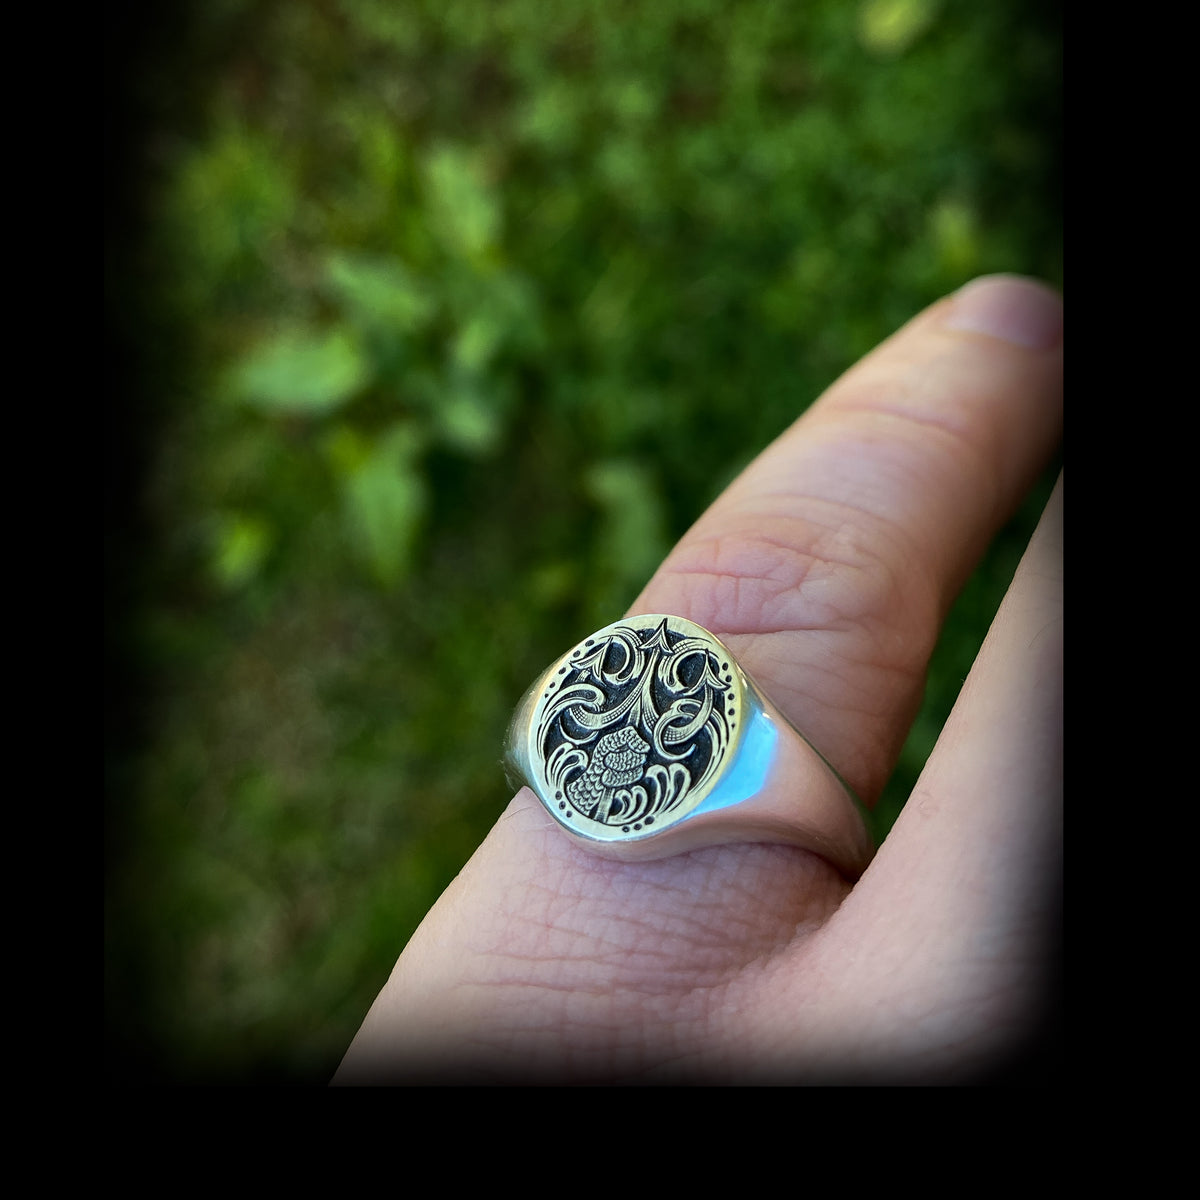 Silver oval jewellery signet ring hand engraved with fantasy scene of Poseidon thrusting his trident from the water. On finger for scale